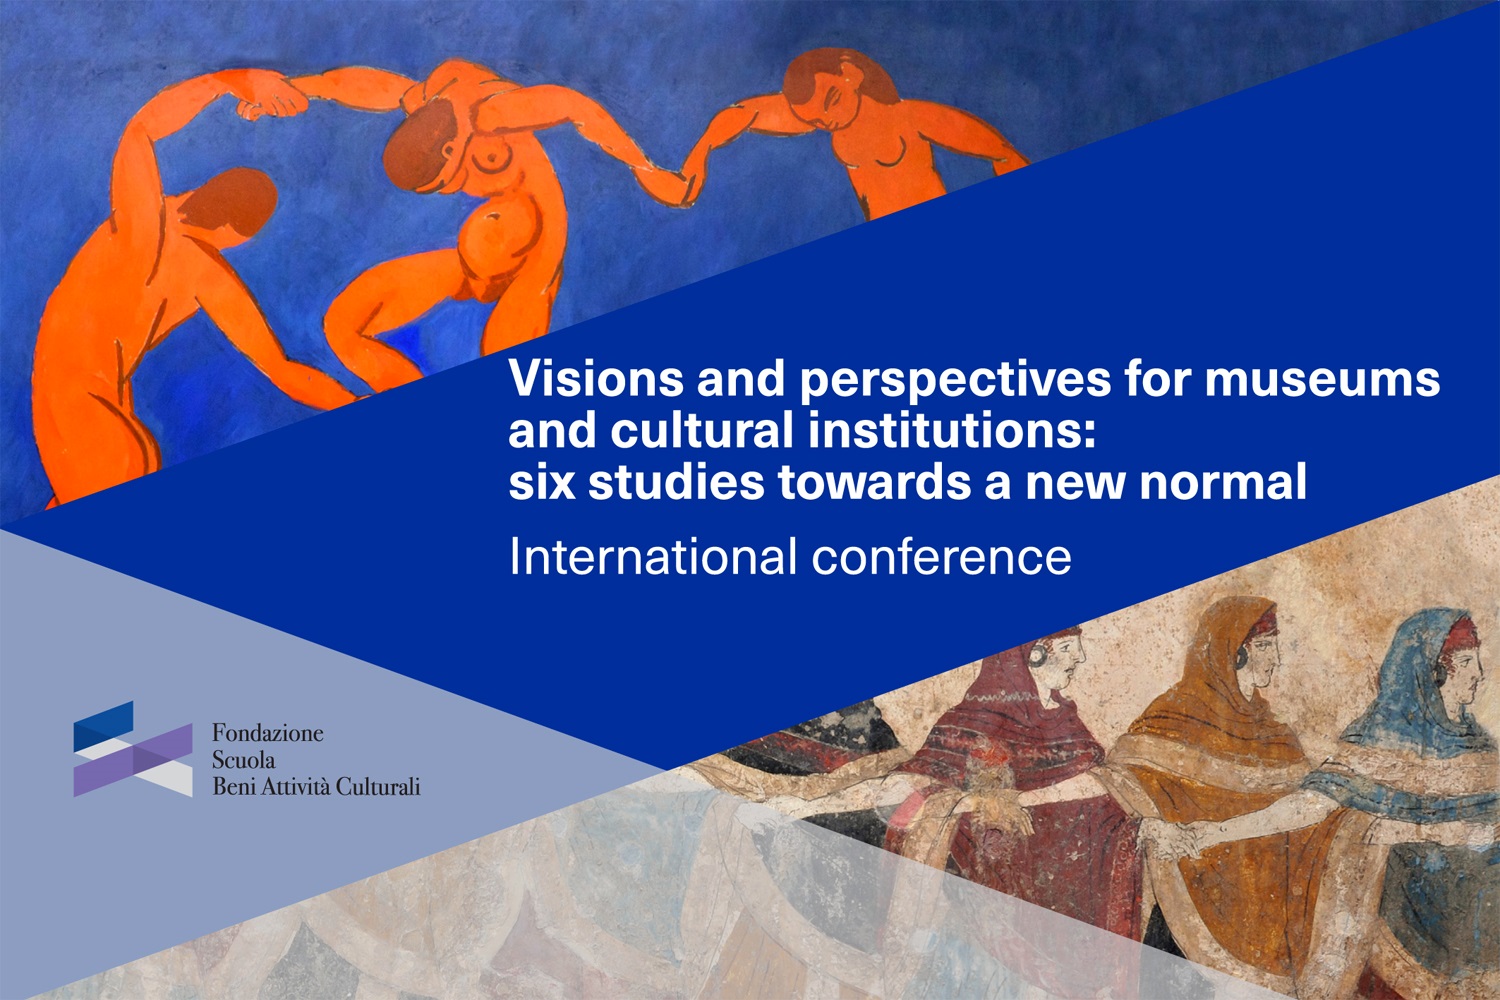  The graphic is divided into two triangles. The upper left triangle is a painting of people holding hands and dancing against a blue background. The image on the lower right is a historic fresco of women holding hands and looking into the same direction. Between the two images a conference is announced.